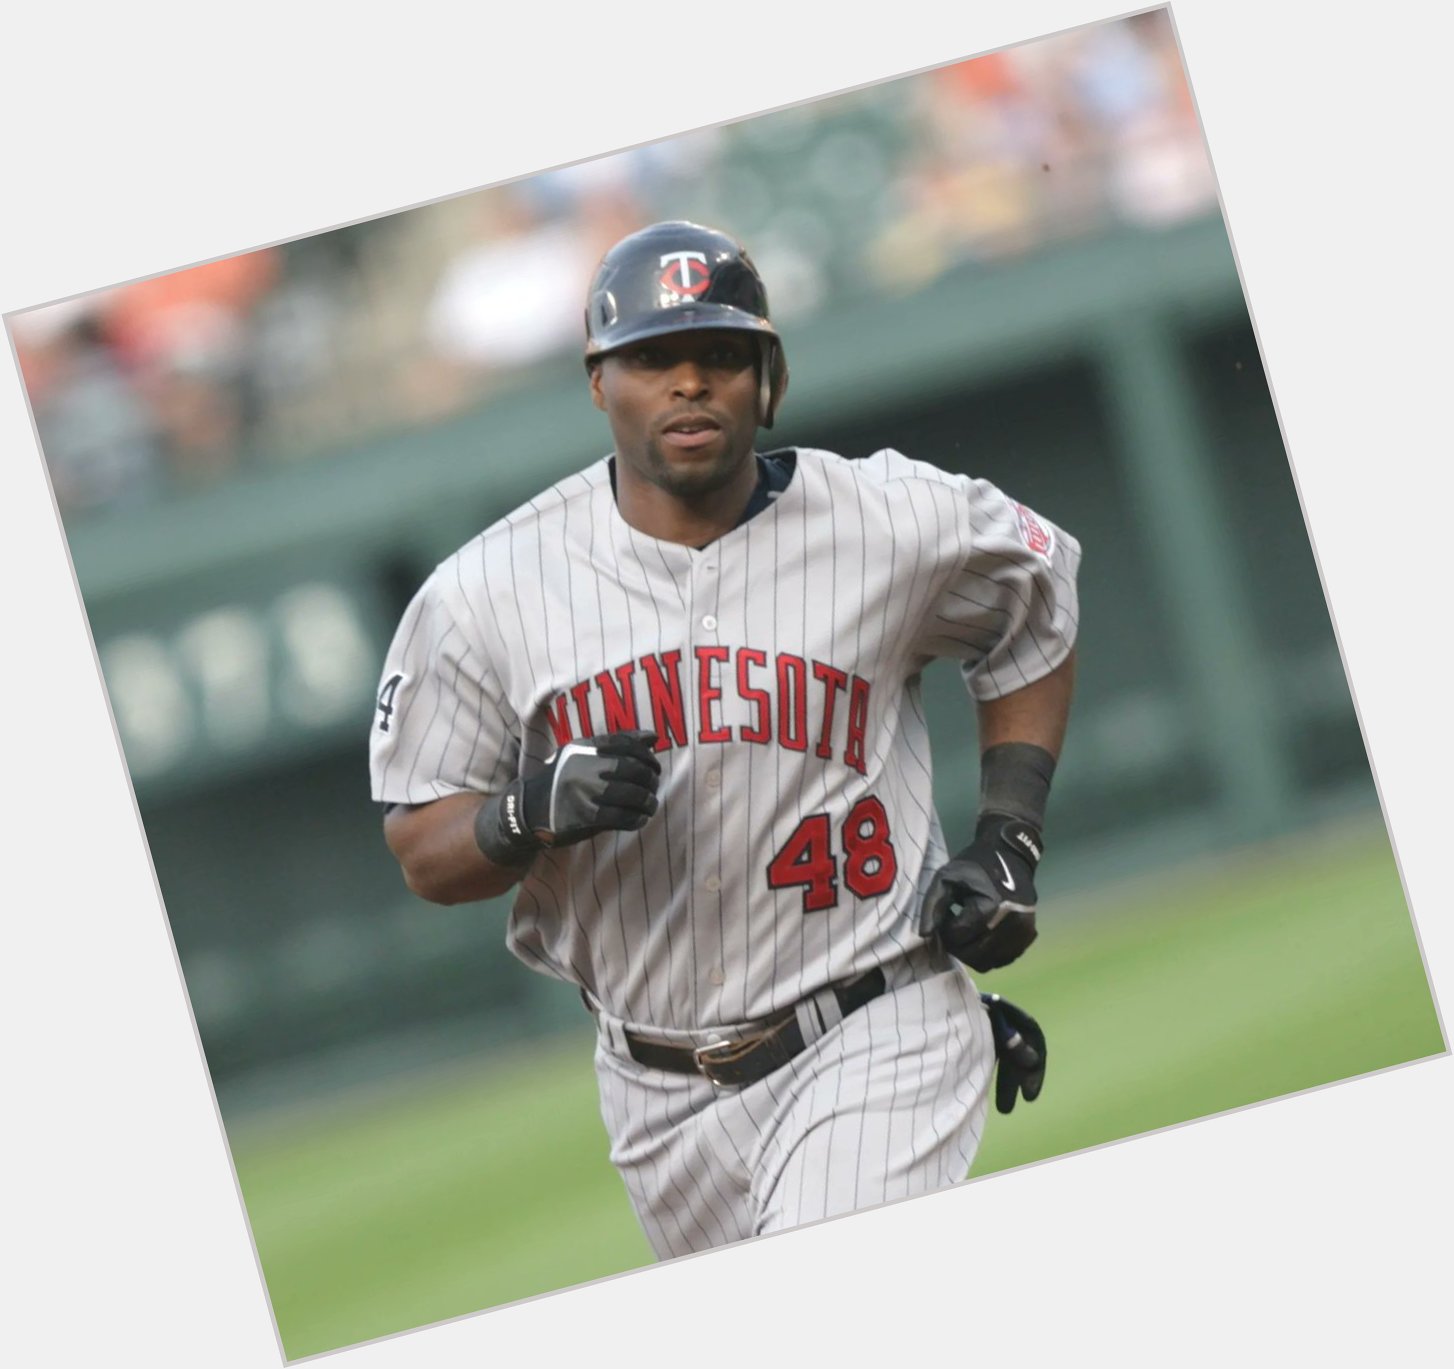 Happy Birthday to Torii Hunter! Born on this date in 1975. 